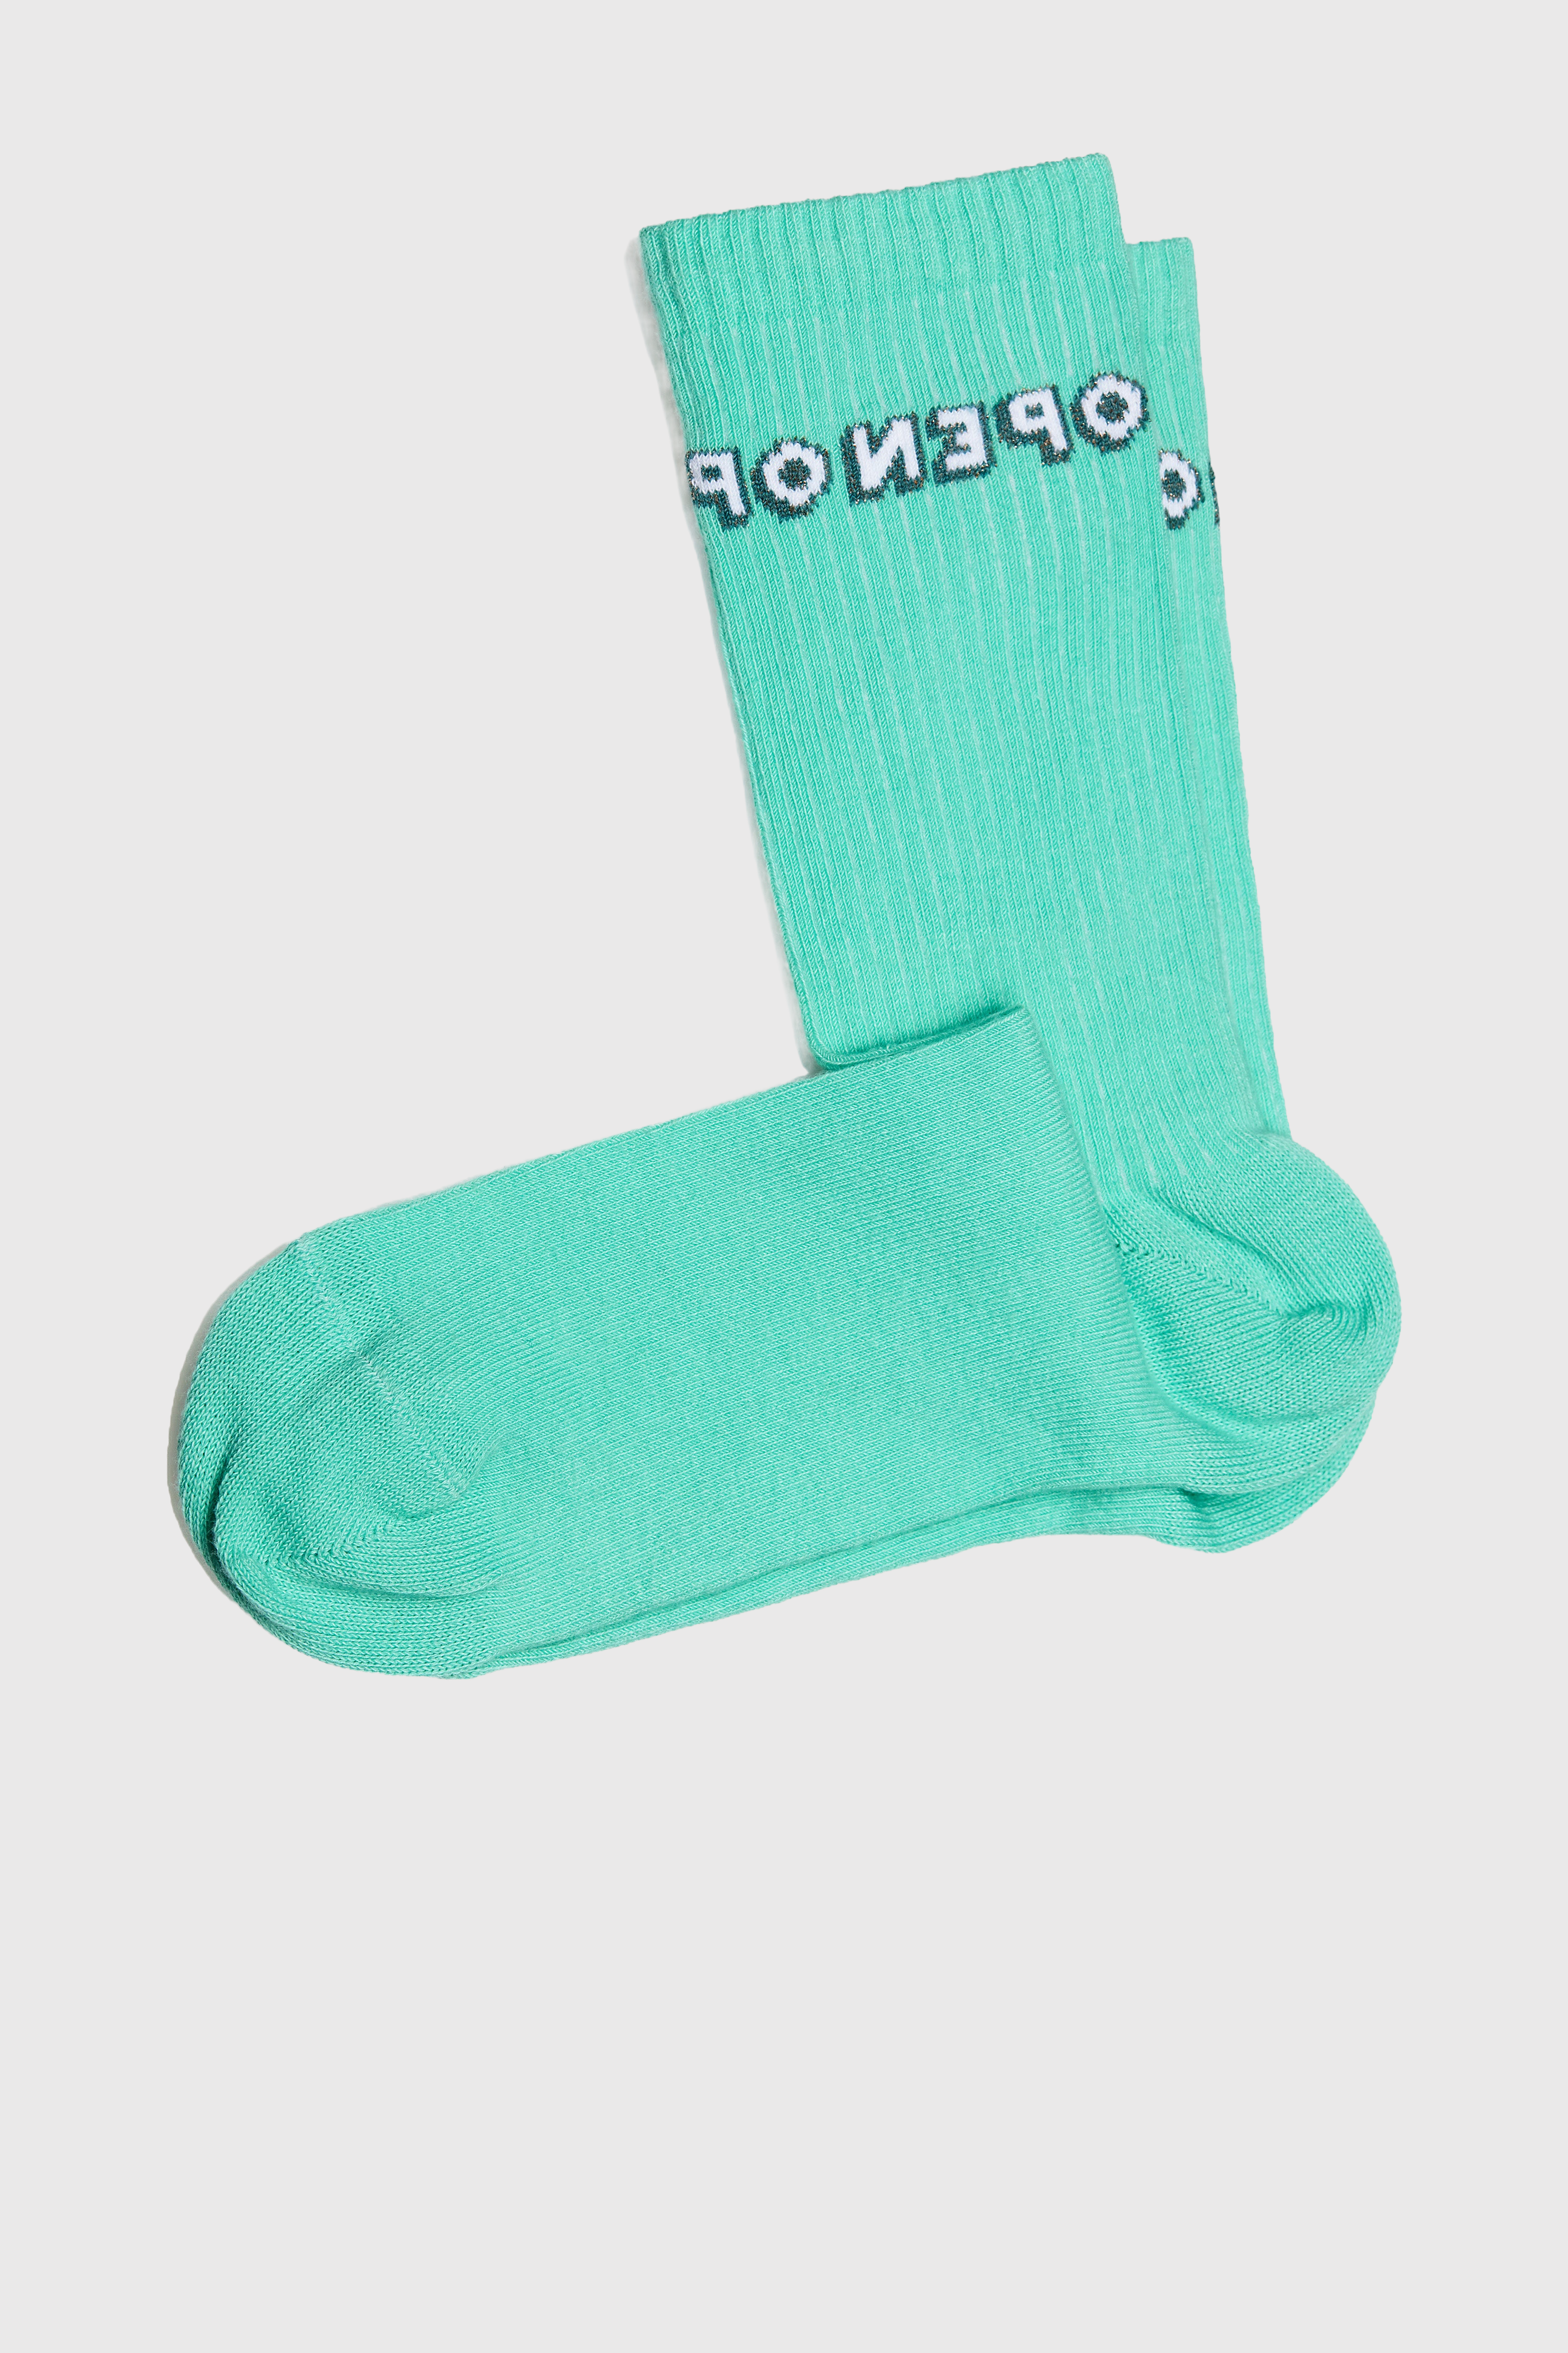 A pair of Turquoise green cotton socks with the word open